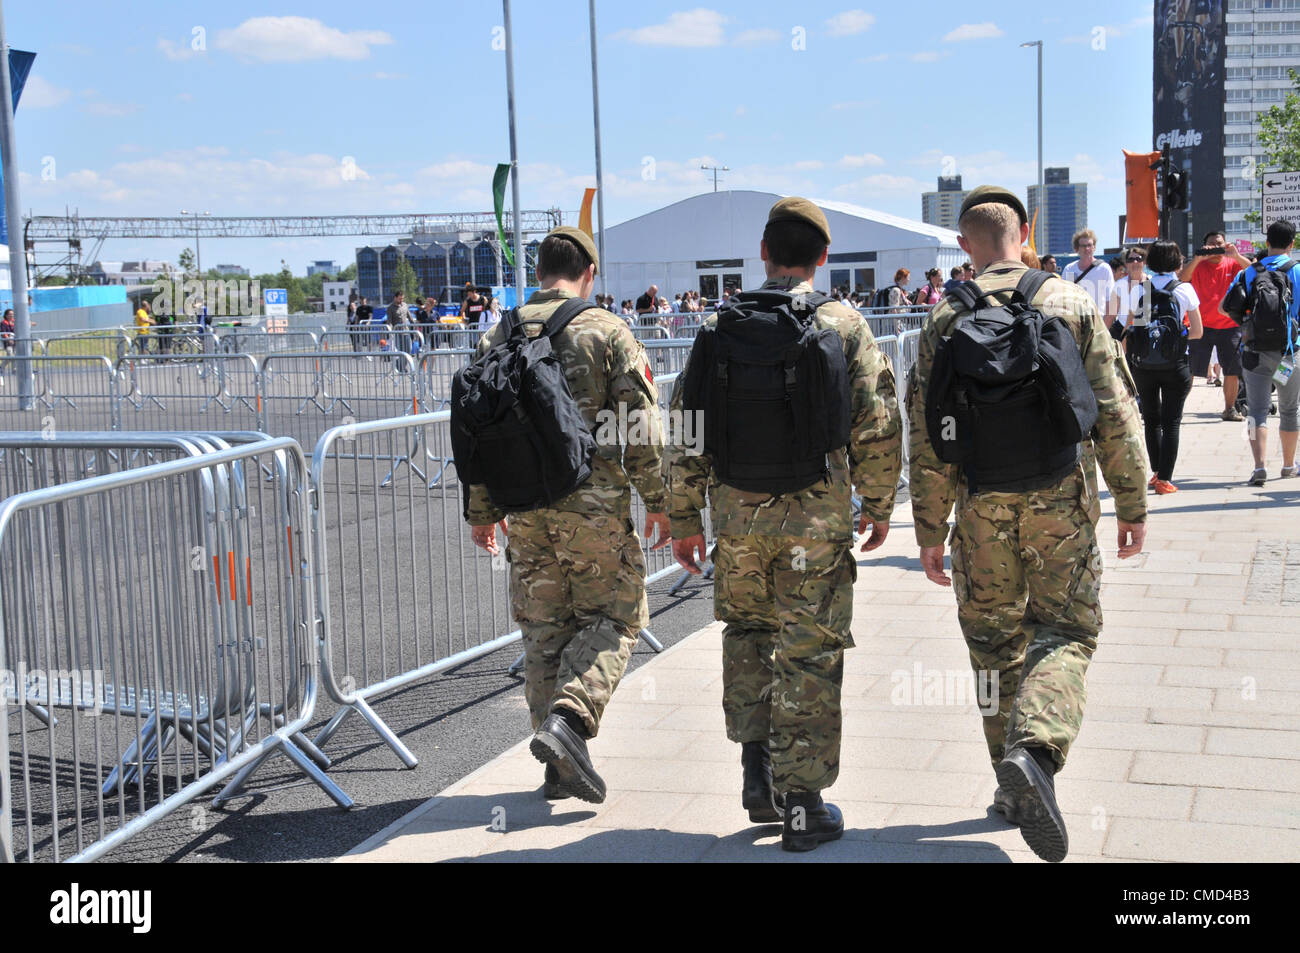 Stratford, London, UK. 22nd July 2012. Soldiers at the Olympic Park which has the army acting as additional security due to the poor performance of G4S the private company that was supposed to supply staff for the games but has failed to do so. Credit:  Matthew Chattle / Alamy Live News Stock Photo